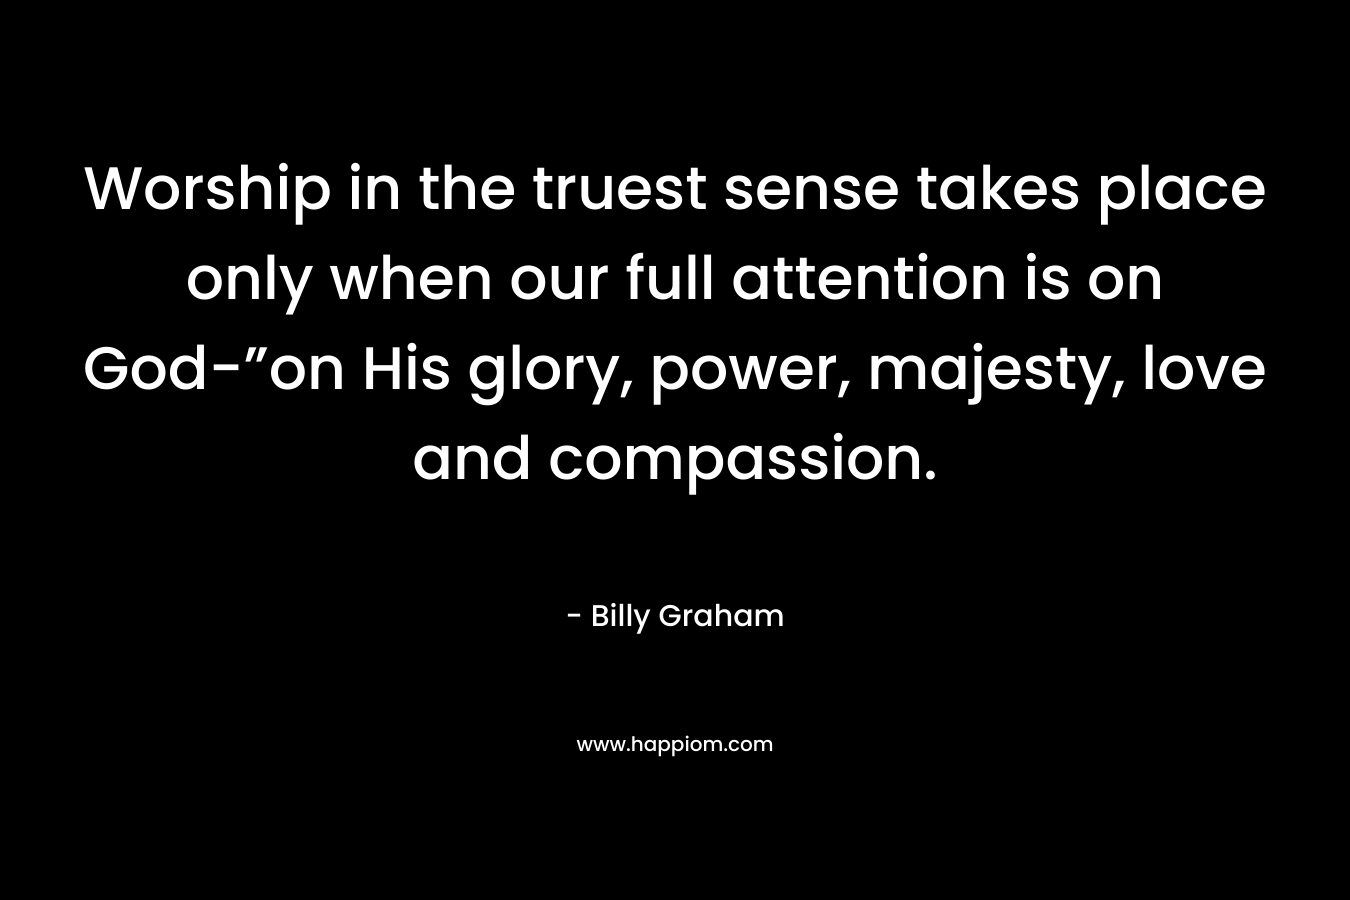 Worship in the truest sense takes place only when our full attention is on God-”on His glory, power, majesty, love and compassion. – Billy Graham